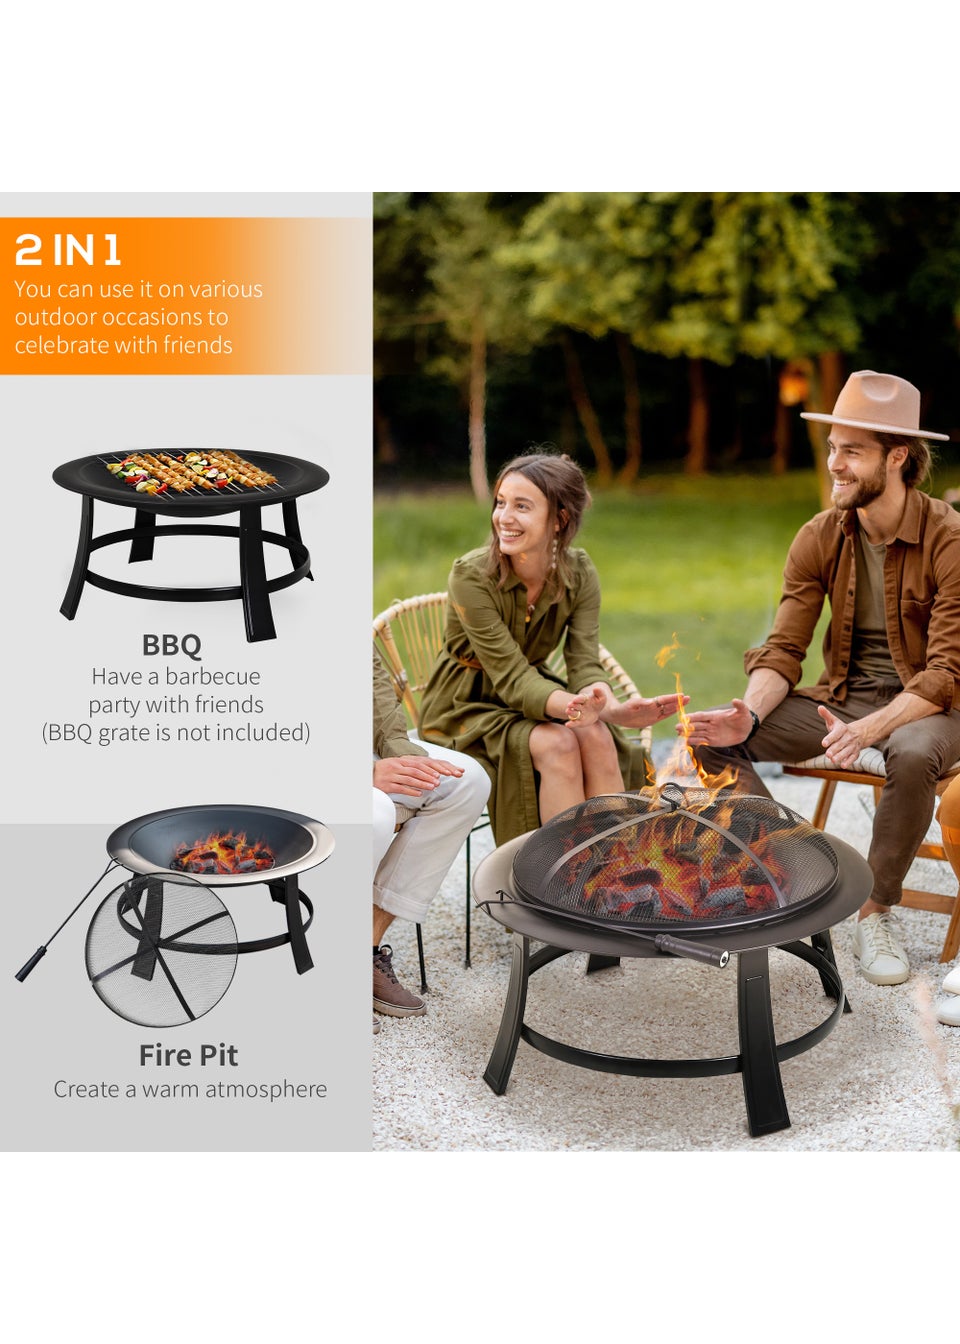 Outsunny Round Metal Fire Pit (76cm x 53cm)